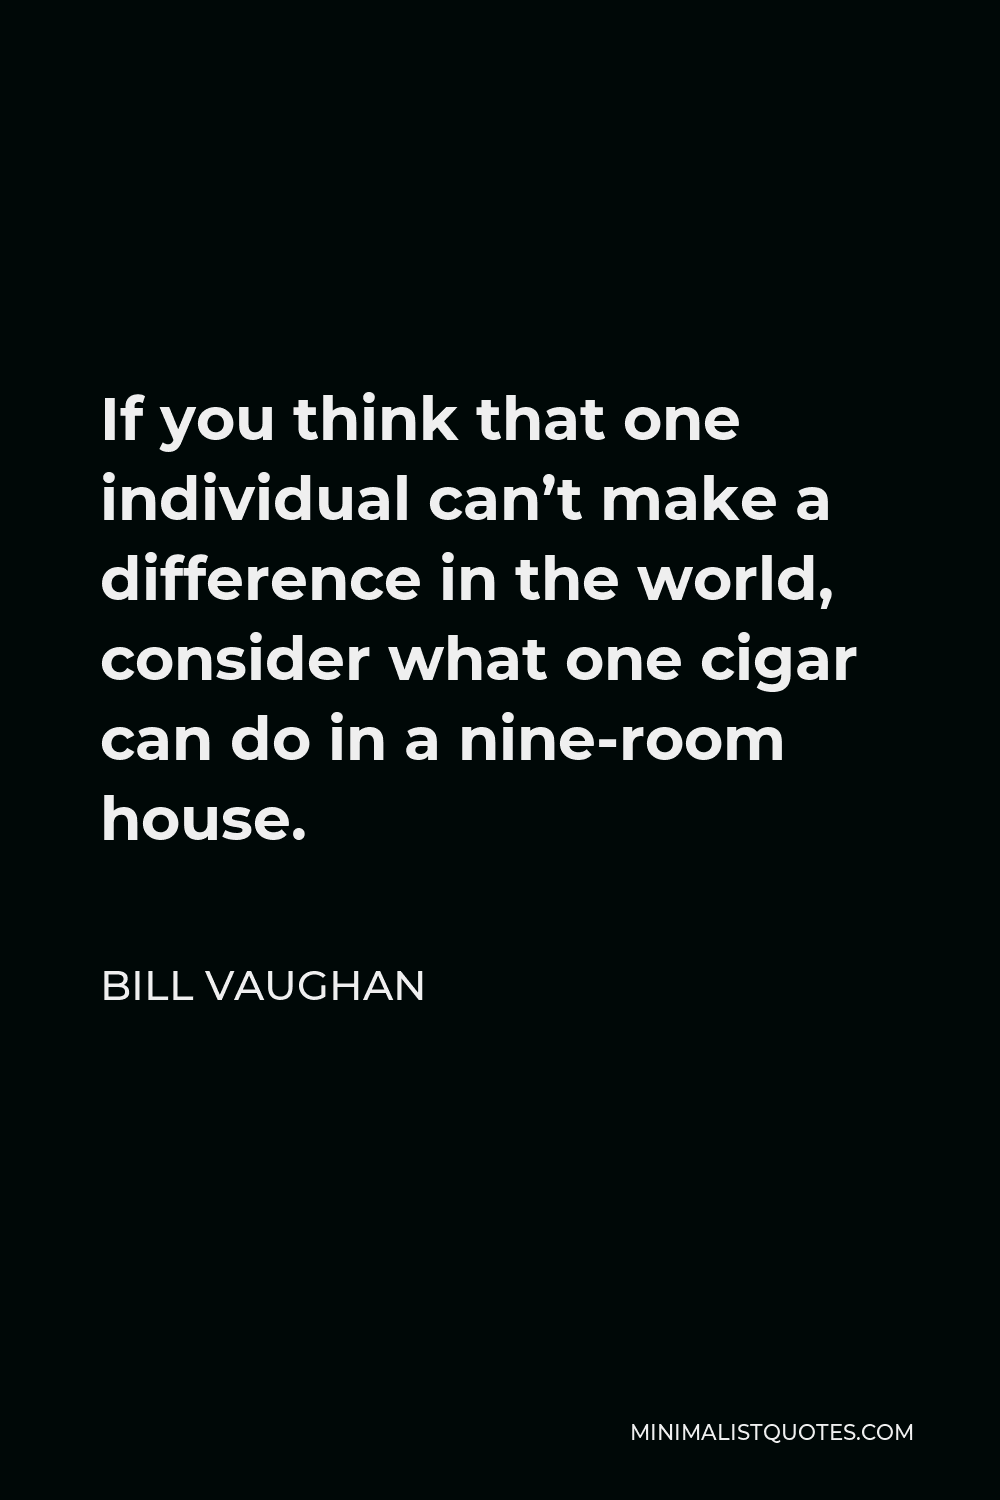 Bill Vaughan Quote - If you think that one individual can’t make a difference in the world, consider what one cigar can do in a nine-room house.